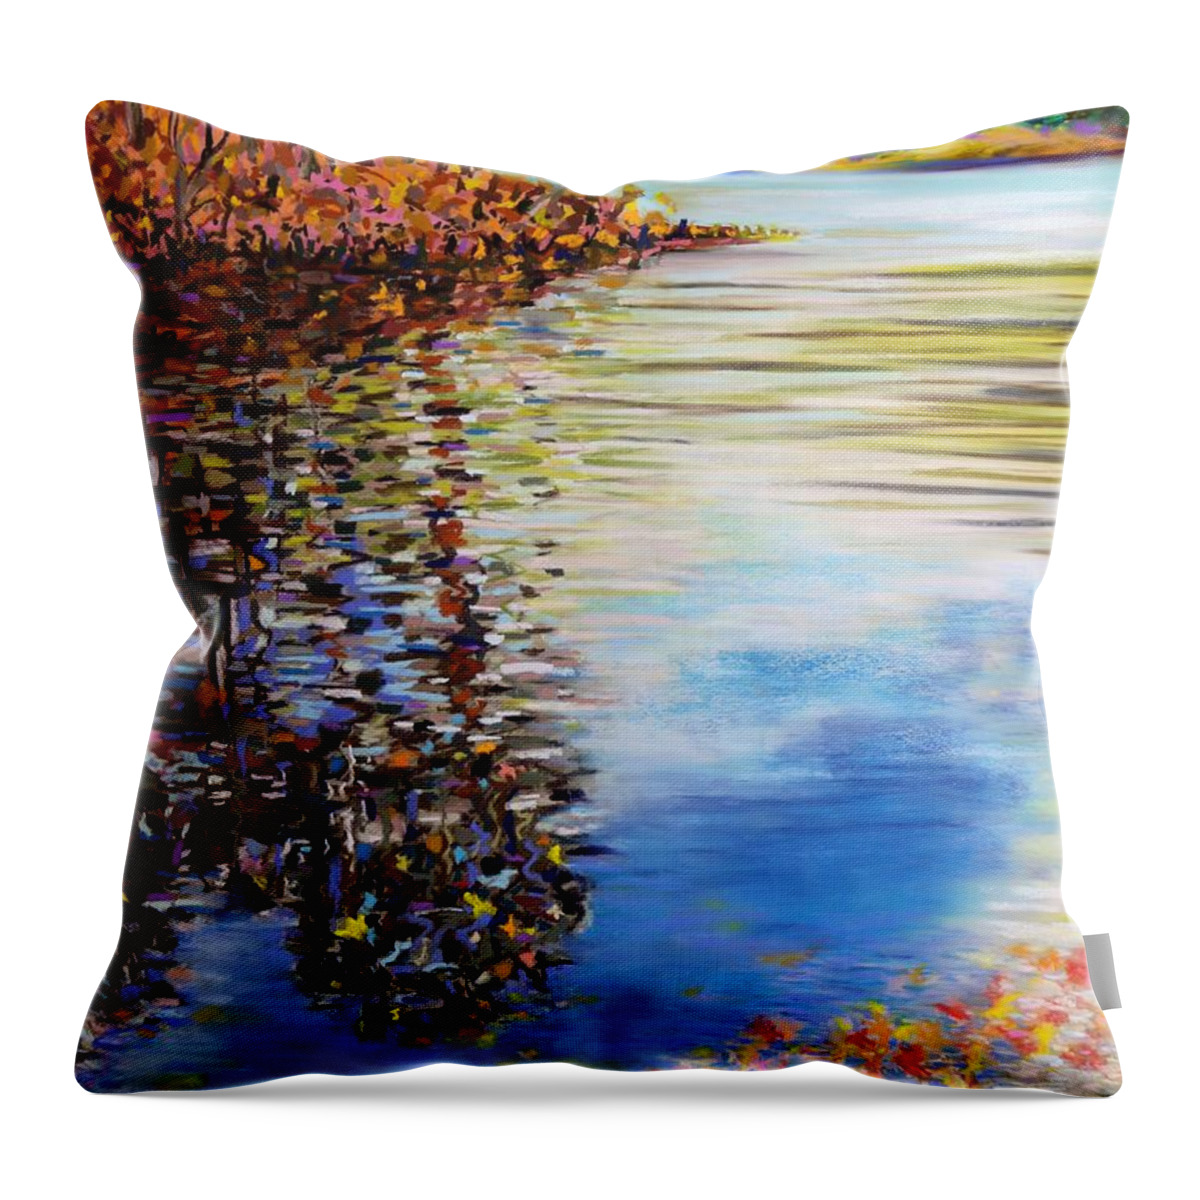  Throw Pillow featuring the painting Great Hollow Lake in November by Polly Castor